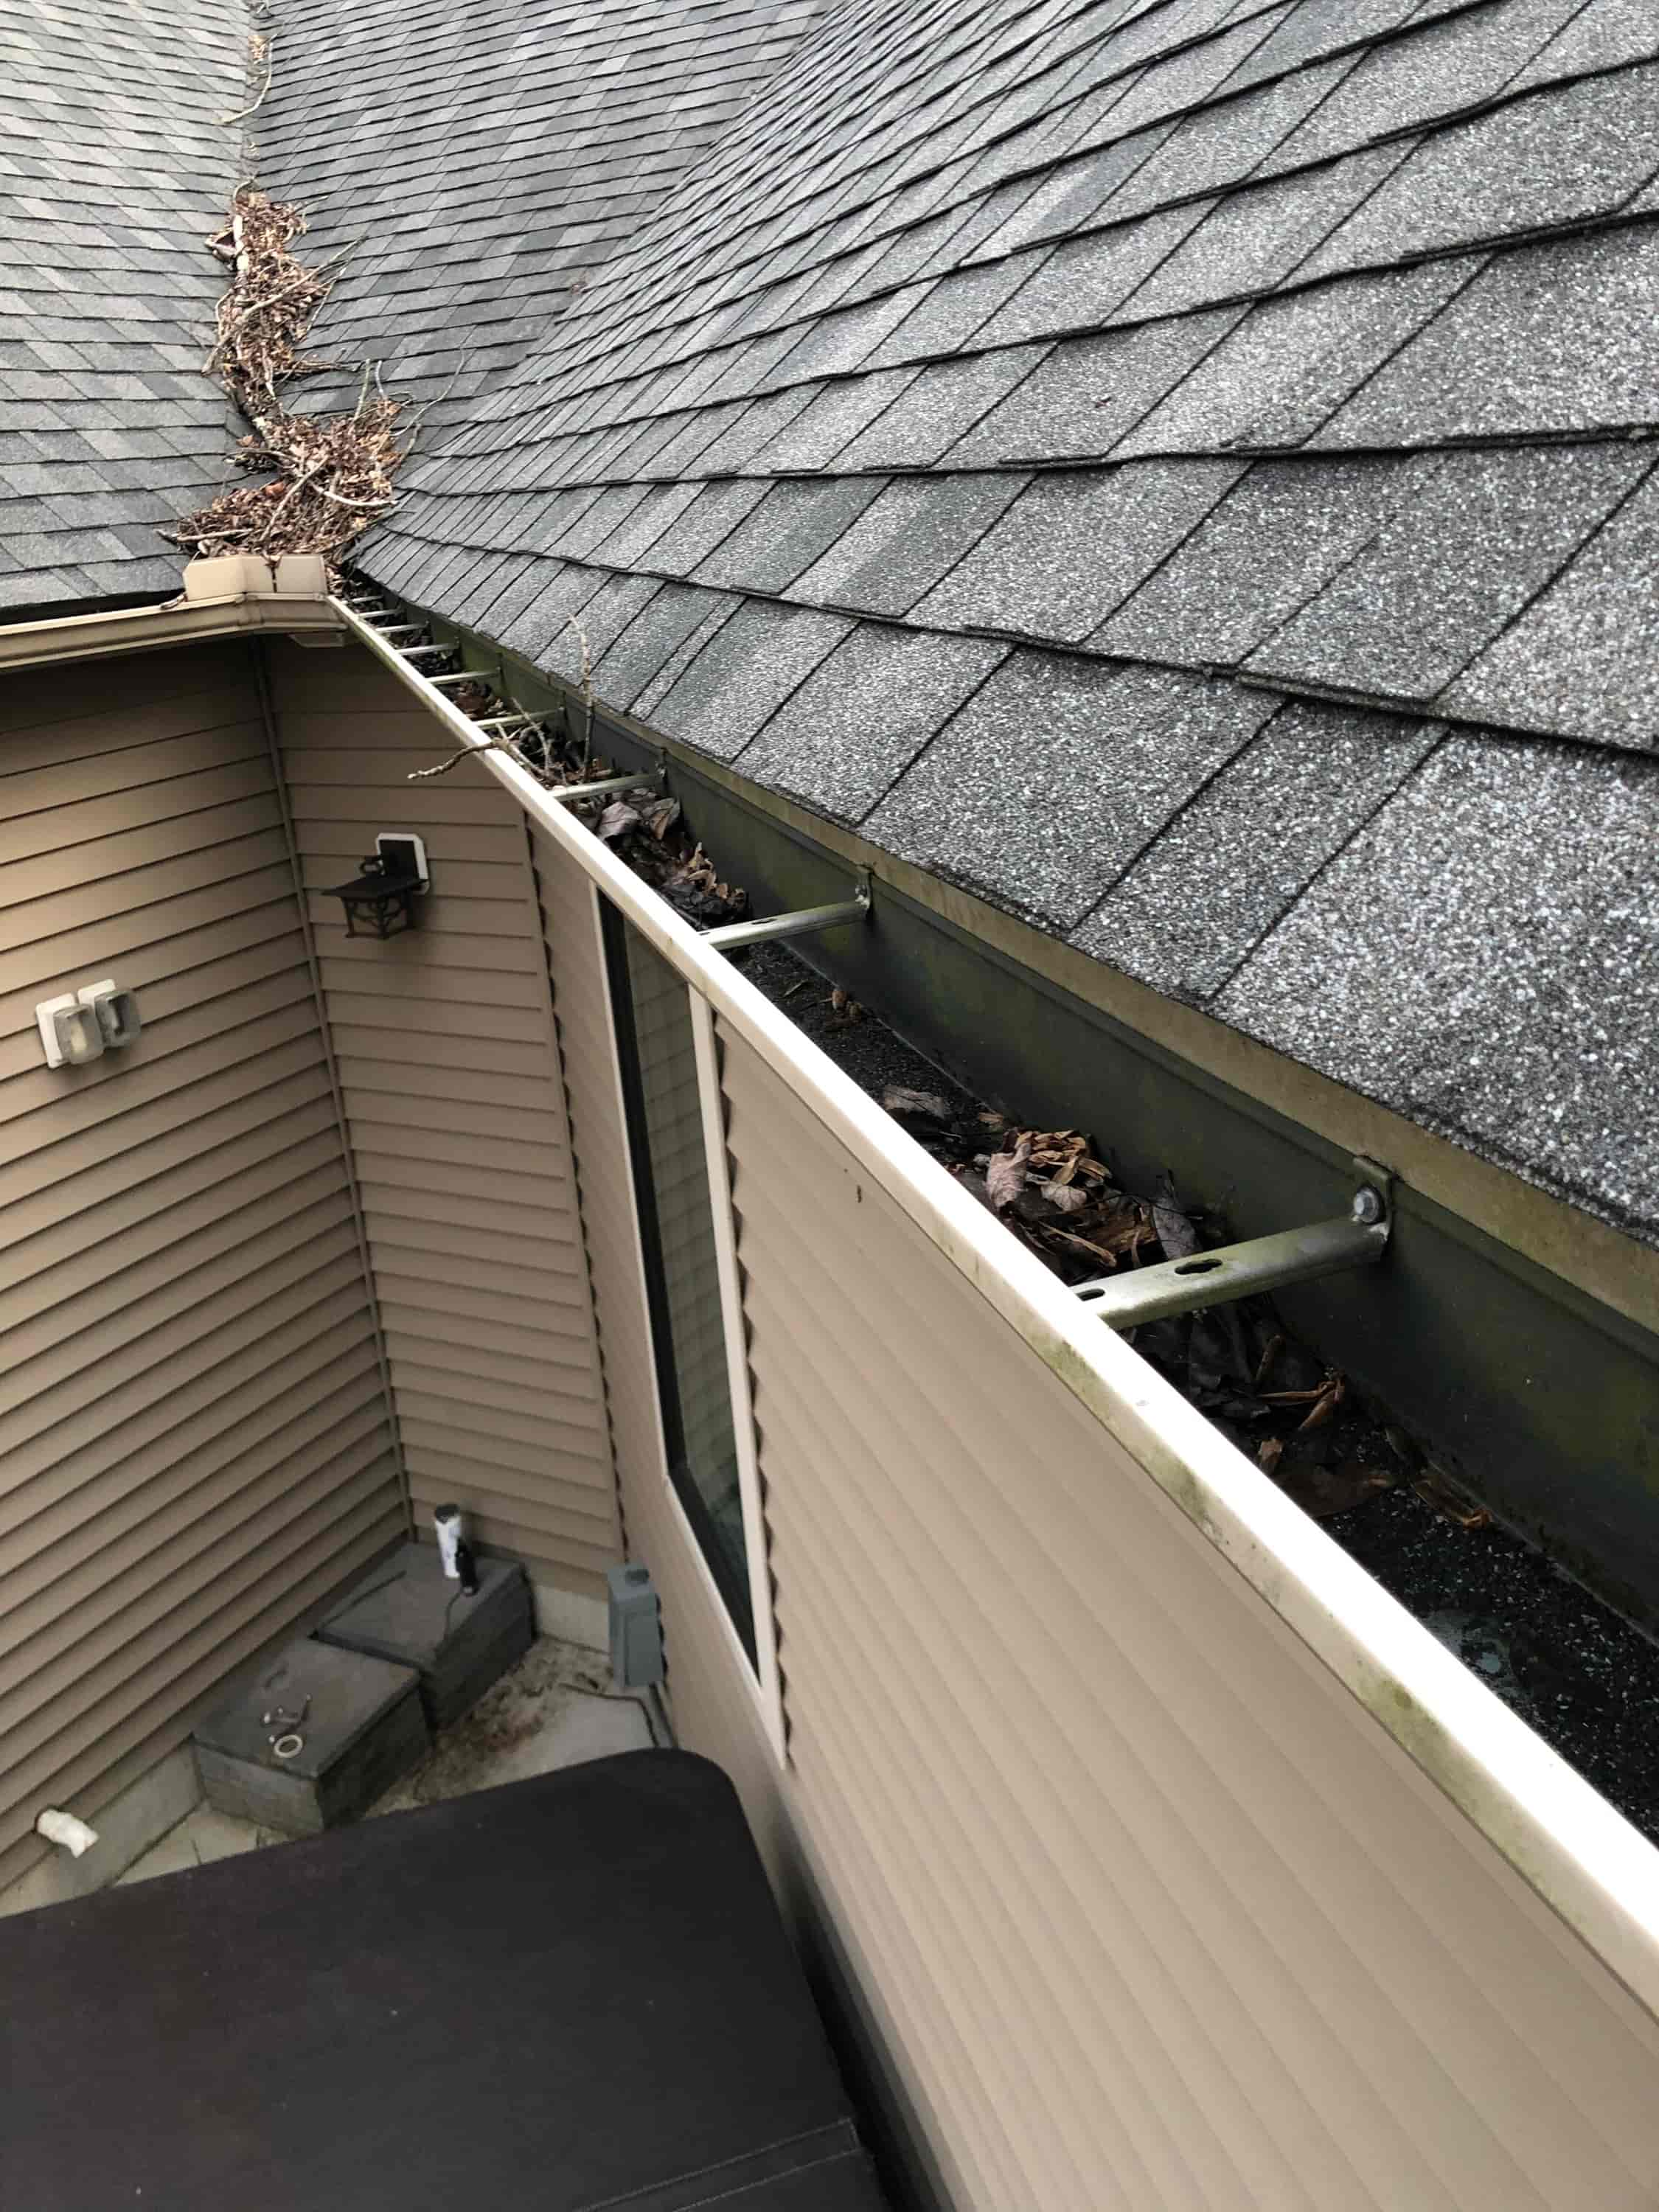 clean 2nd story gutters from ground